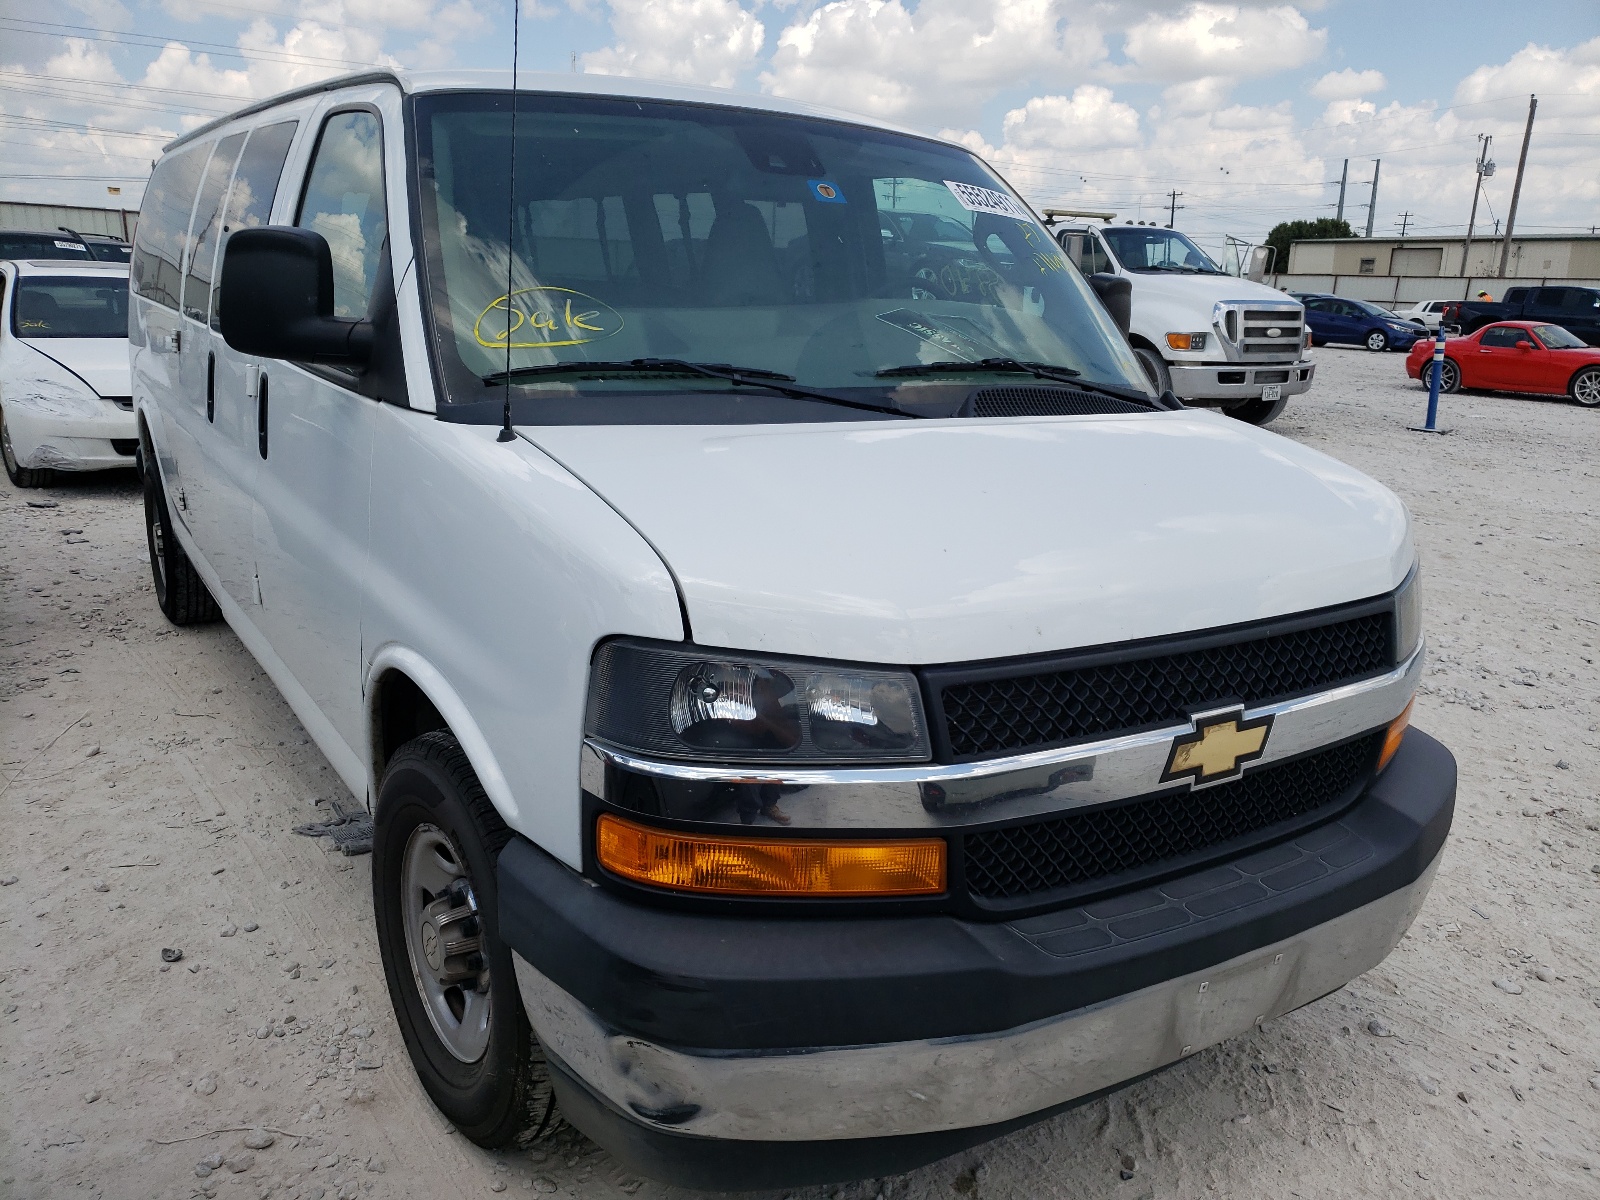 https://mcarsdelivery.com.ua/auctions-cars/264419/